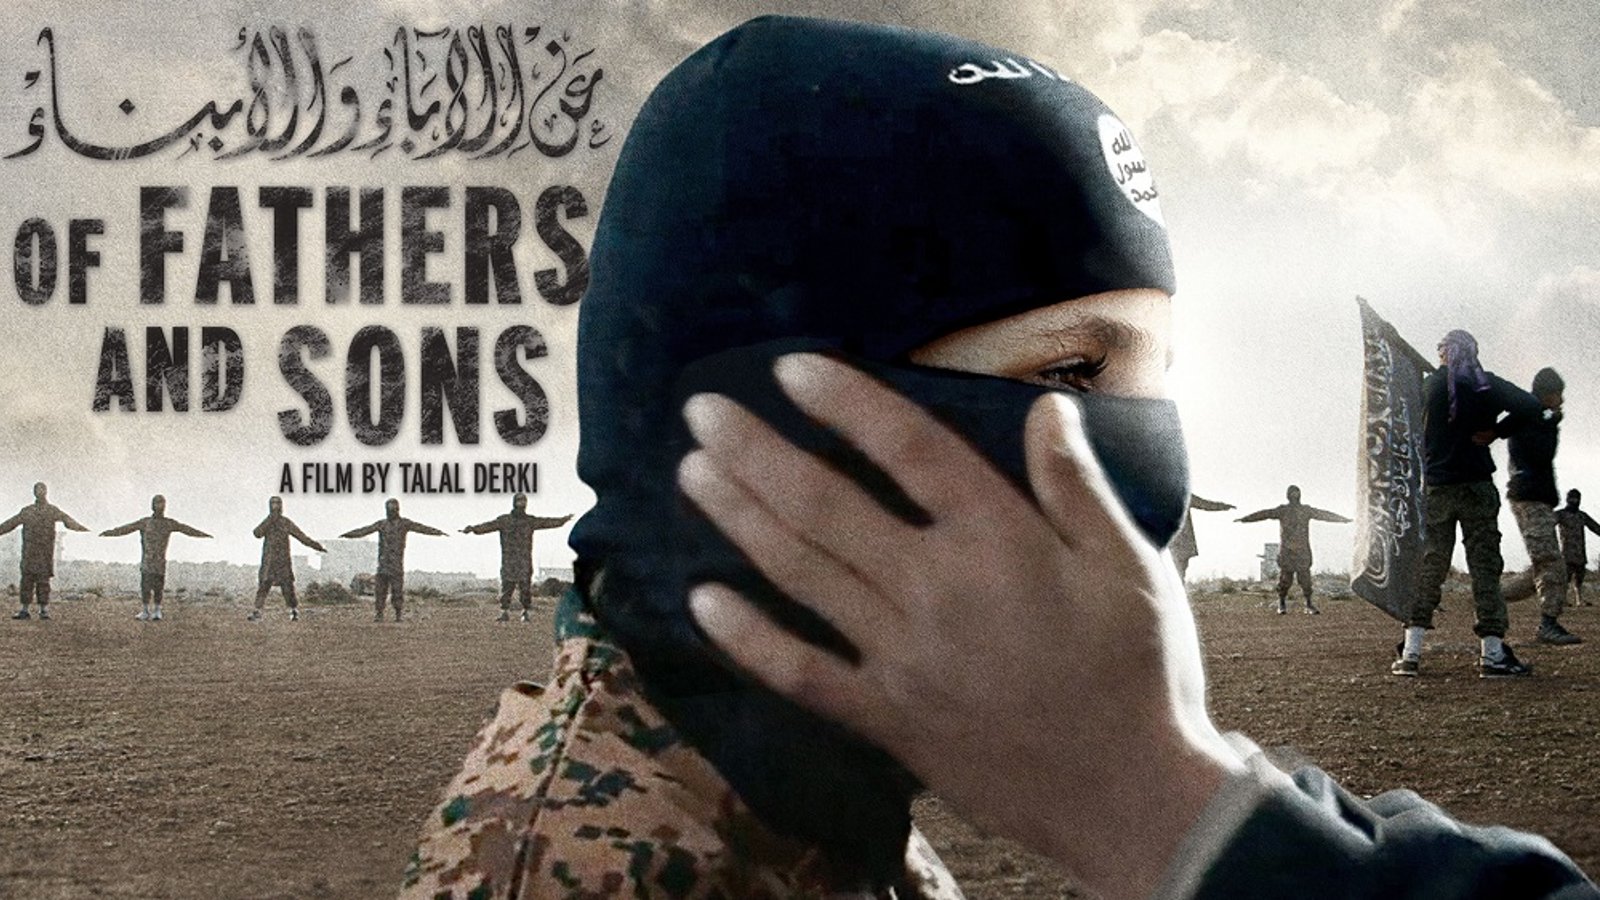 Of Fathers and Sons - Following a Radical Islamist Family in Syria